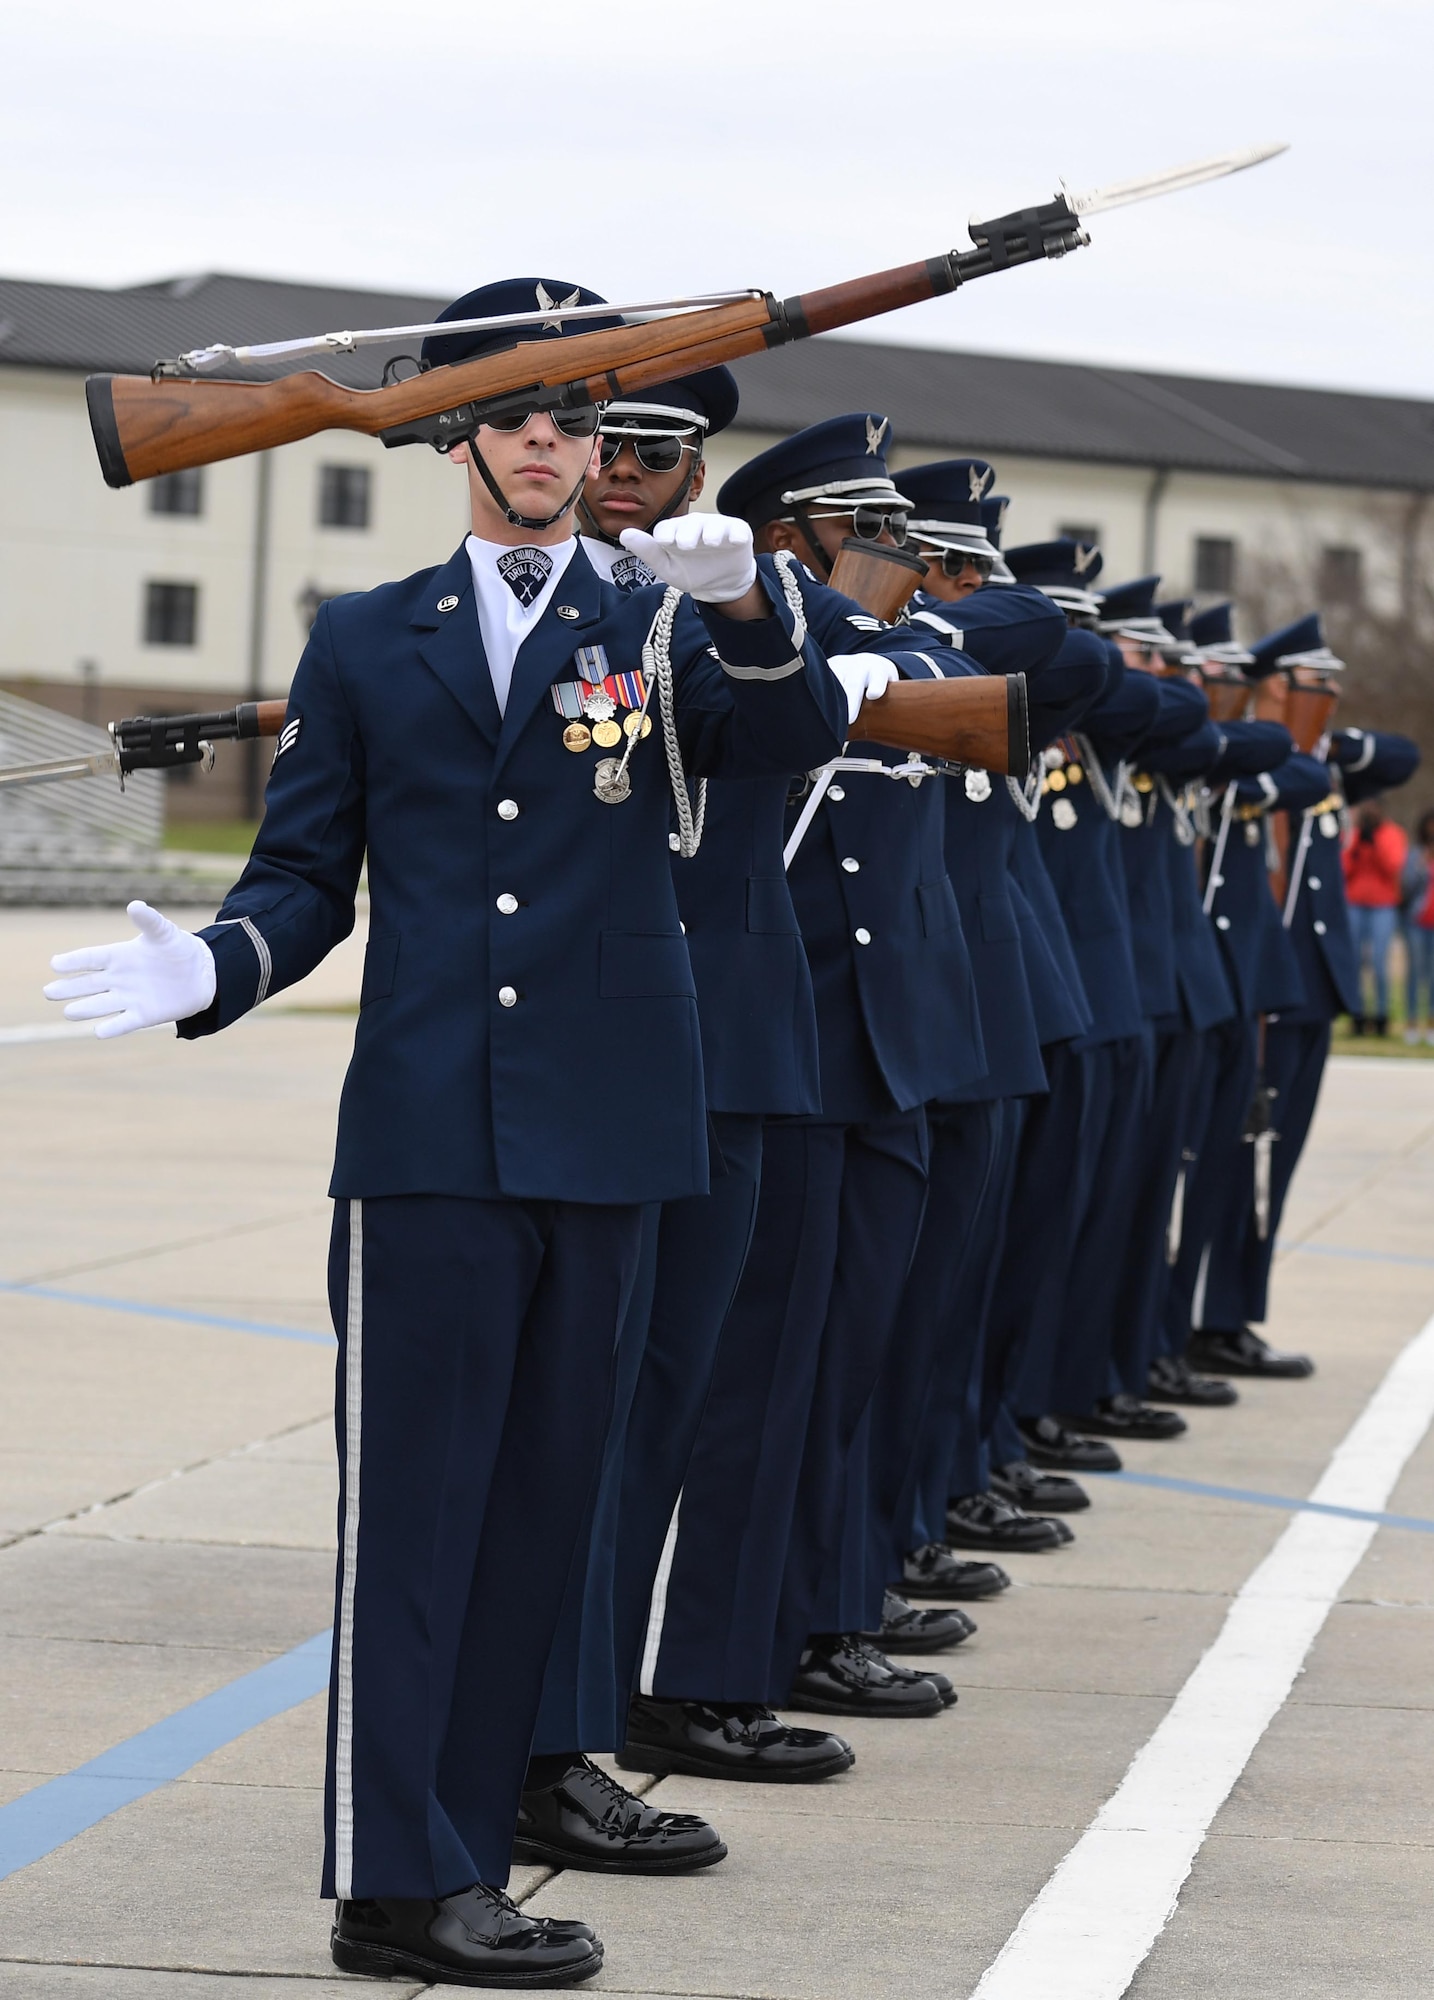 The U.S. Air Force Honor Guard Drill Team debuts their 2019 routine in front of Keesler leadership and 81st Training Group Airmen on the Levitow Training Support Facility drill pad at Keesler Air Force Base, Mississippi, Feb. 8, 2019. They are the nation's most elite honor guard, serving the President of the United States, the Air Force's most senior leaders and performing nationwide for the American public. The team comes to Keesler every year for five weeks to develop a new routine that they will use throughout the year. (U.S. Air Force photo by Kemberly Groue)